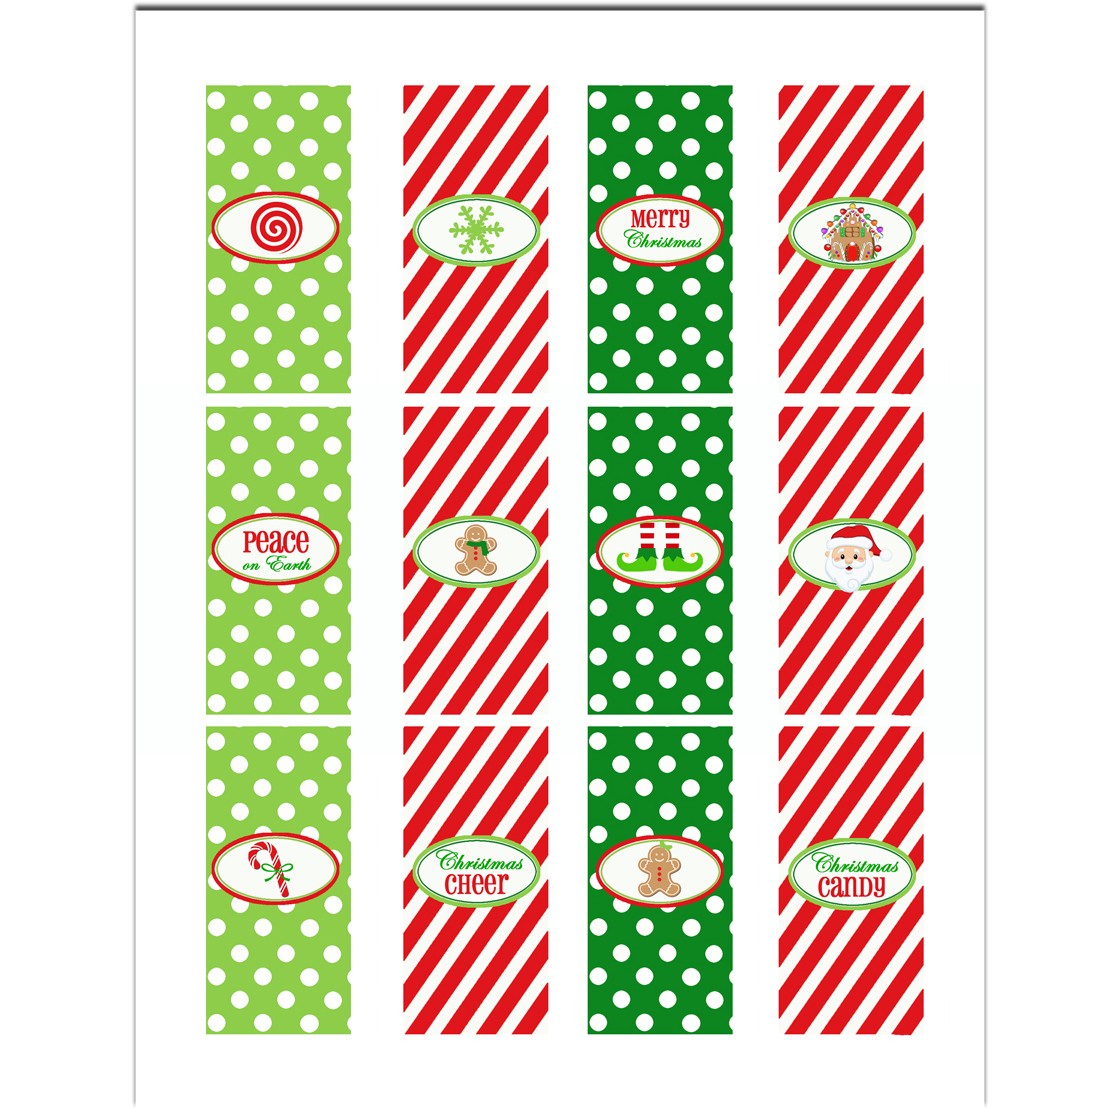 free-printable-nightmare-before-christmas-mini-candy-bar-wrappers